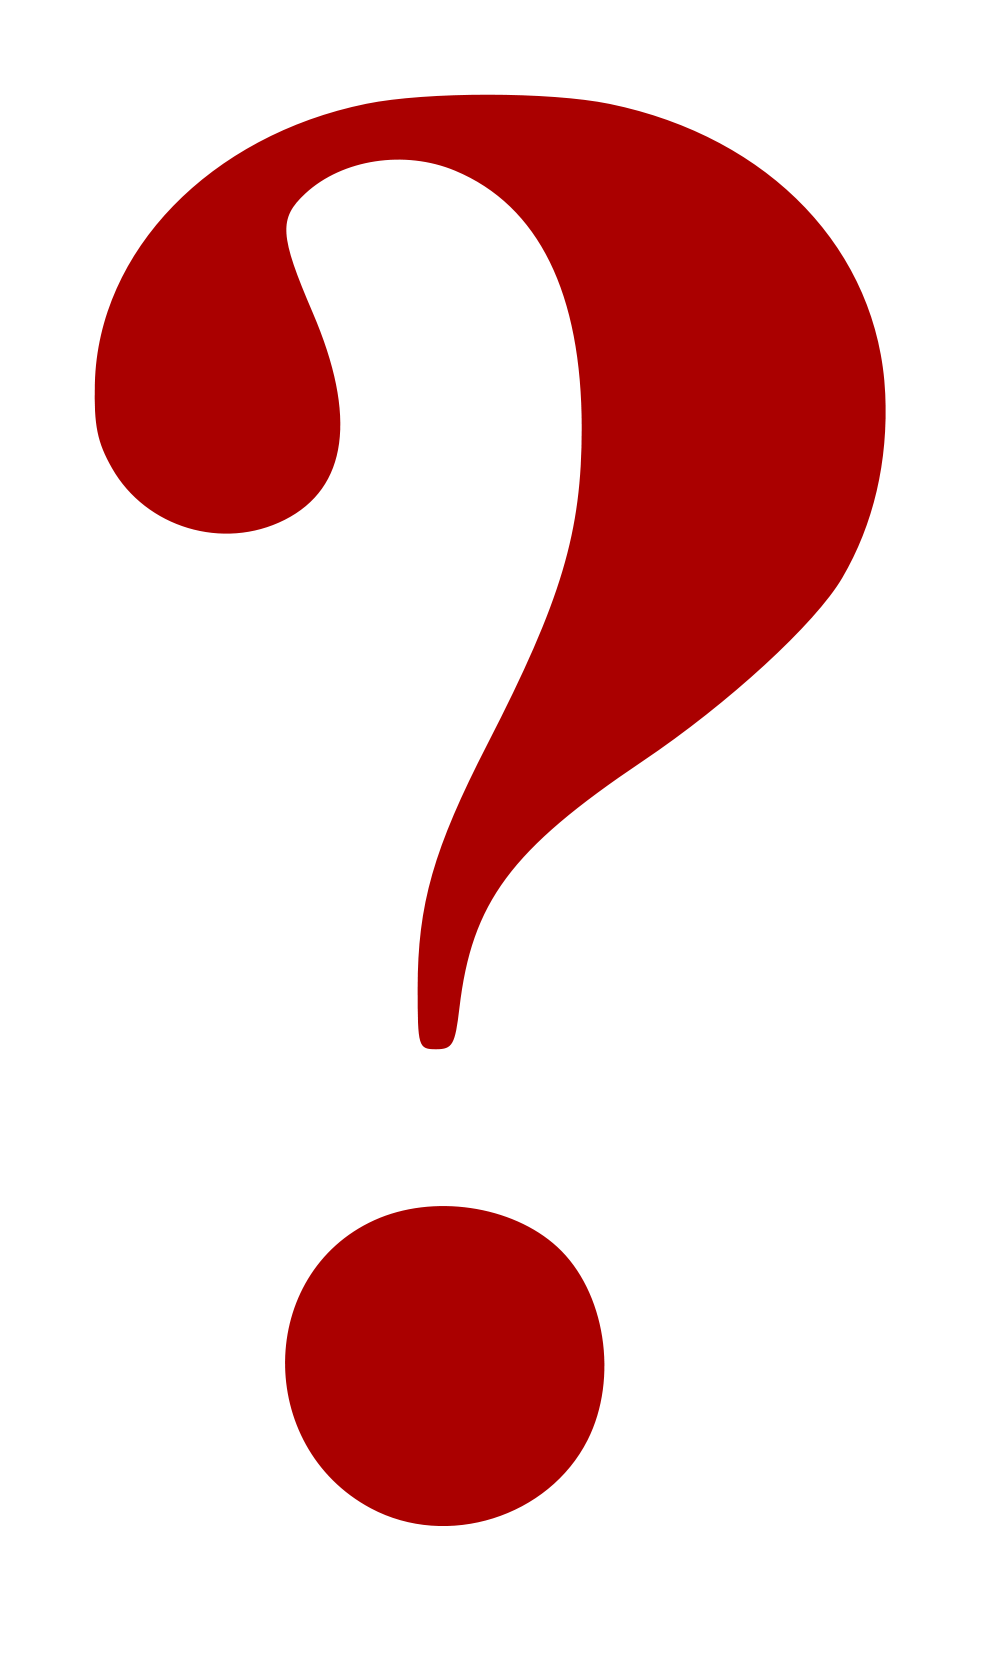 Images For > Red Question Mark Clipart